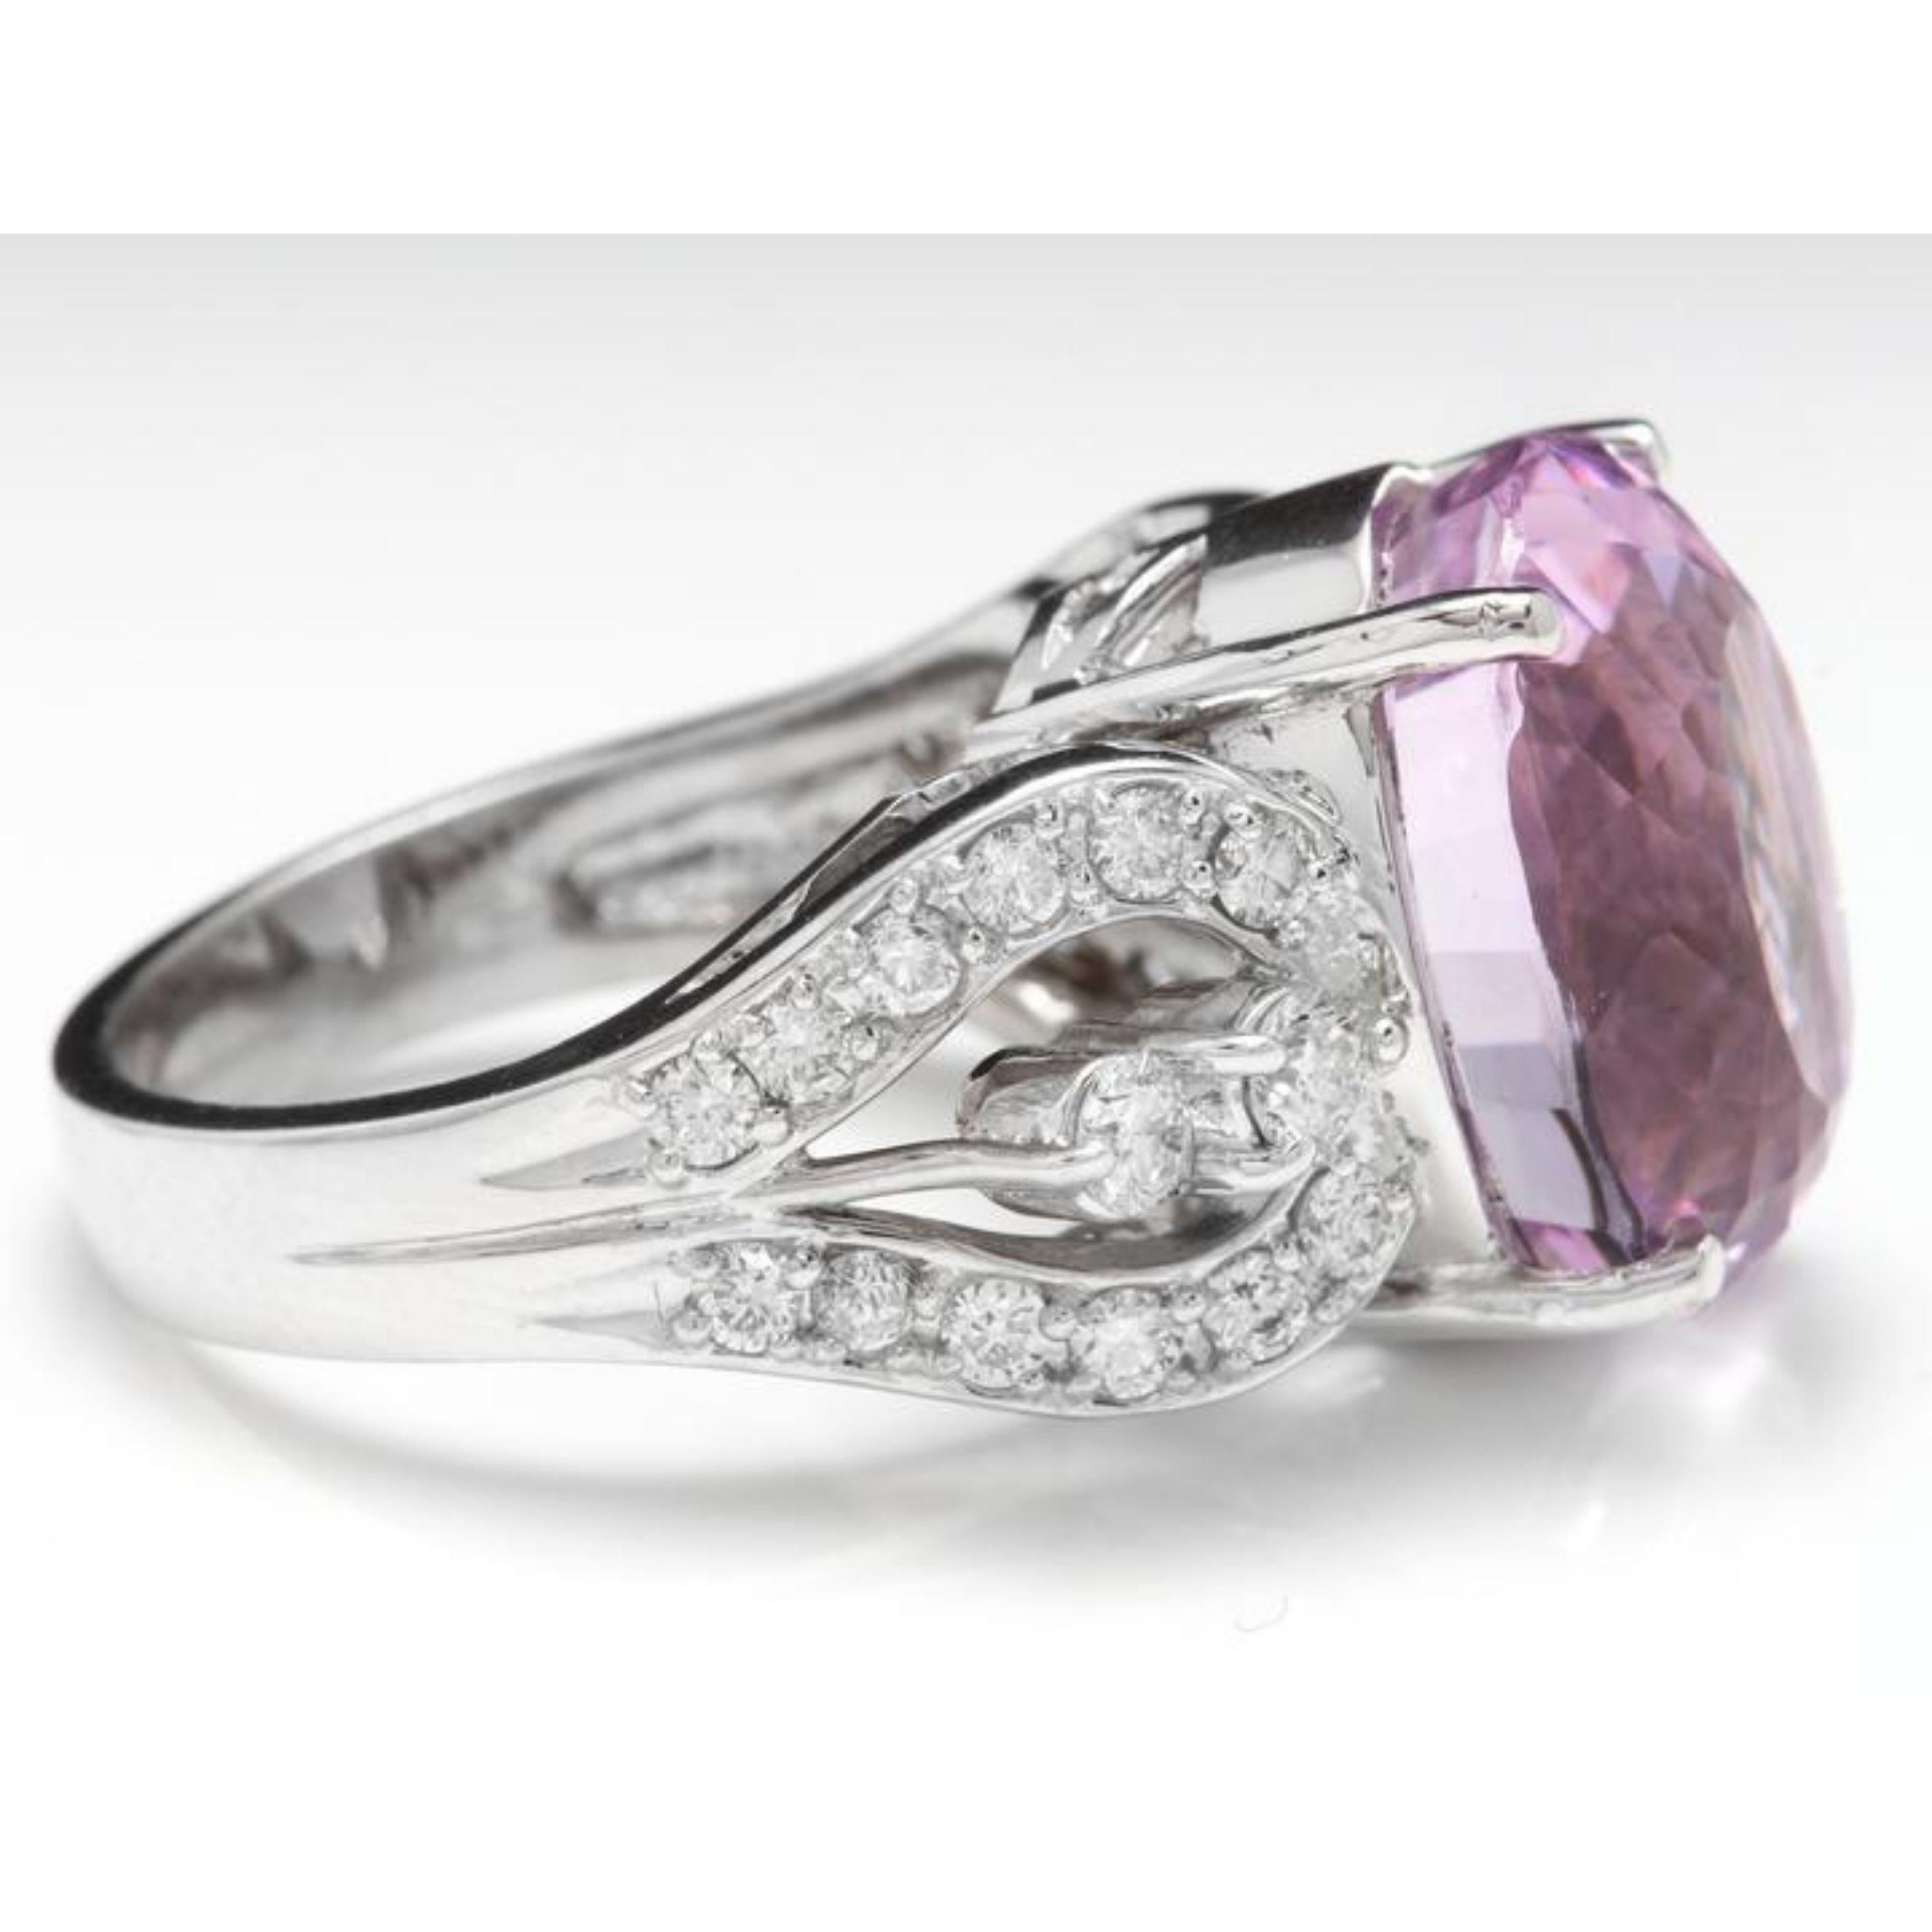 Mixed Cut 16.05 Carat Natural Kunzite and Diamond 14 Karat Solid White Gold Ring For Sale